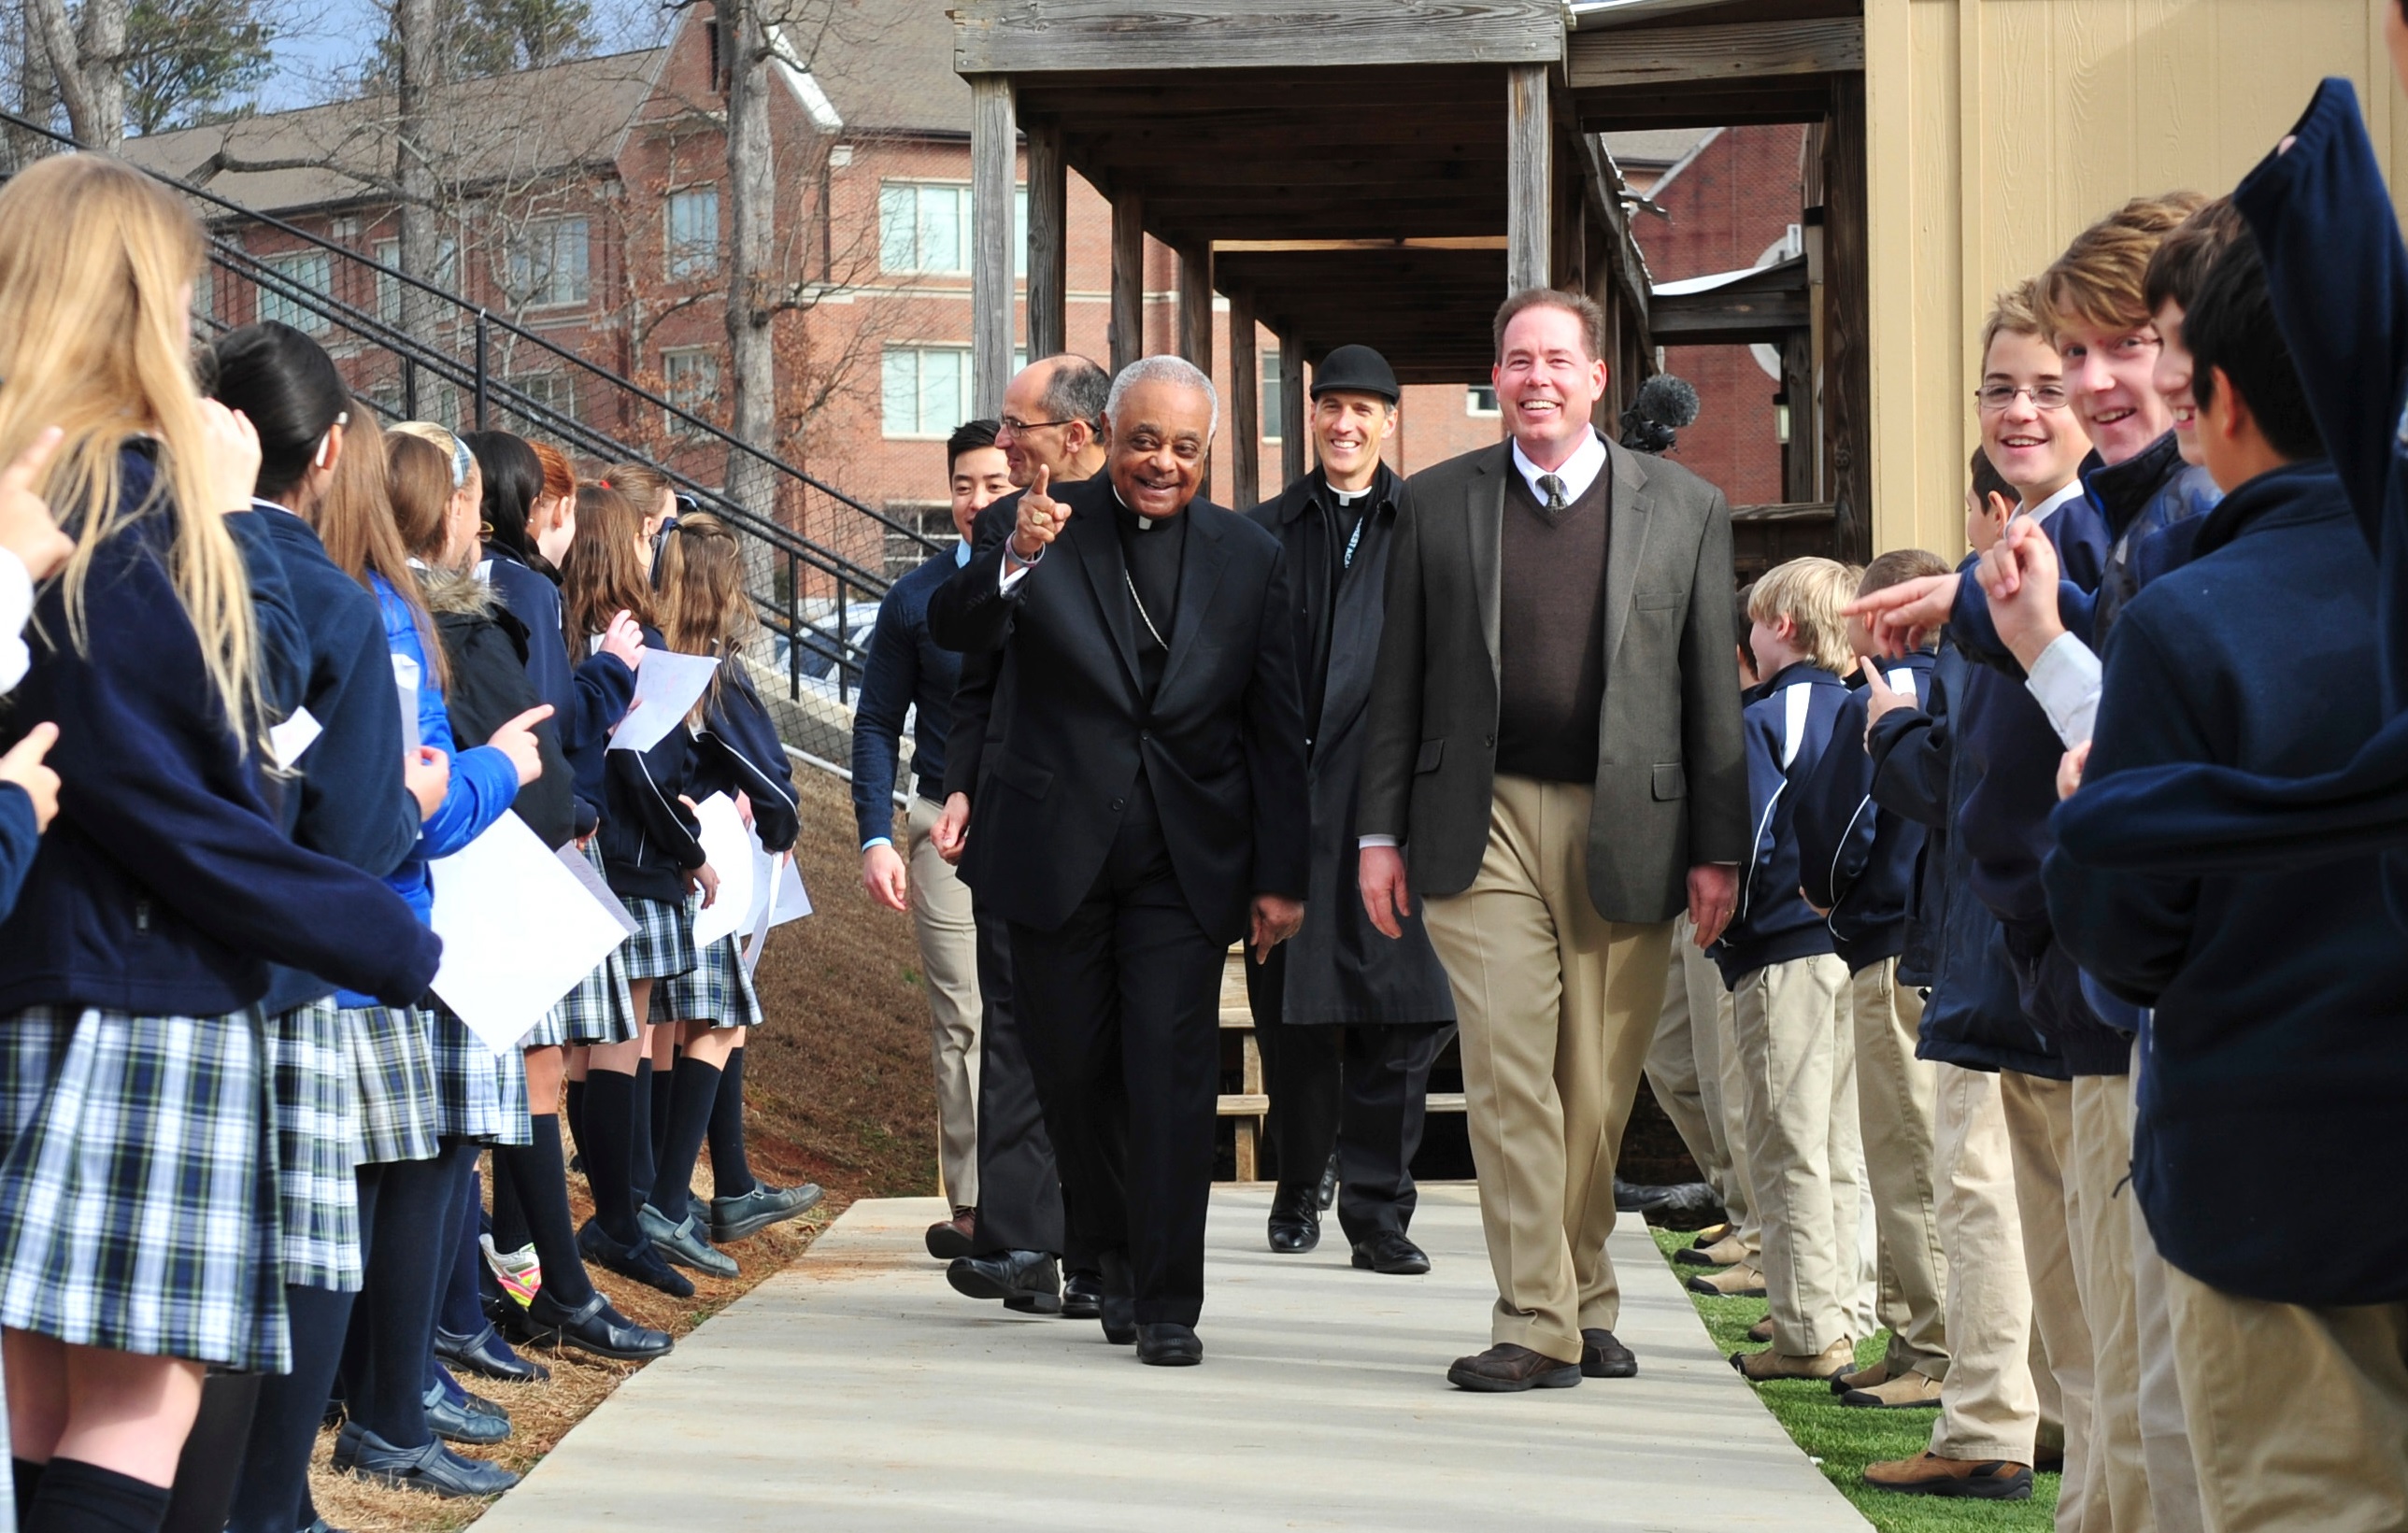 Archbishop Gregory Visits Pinecrest Academy for Founders Day Events